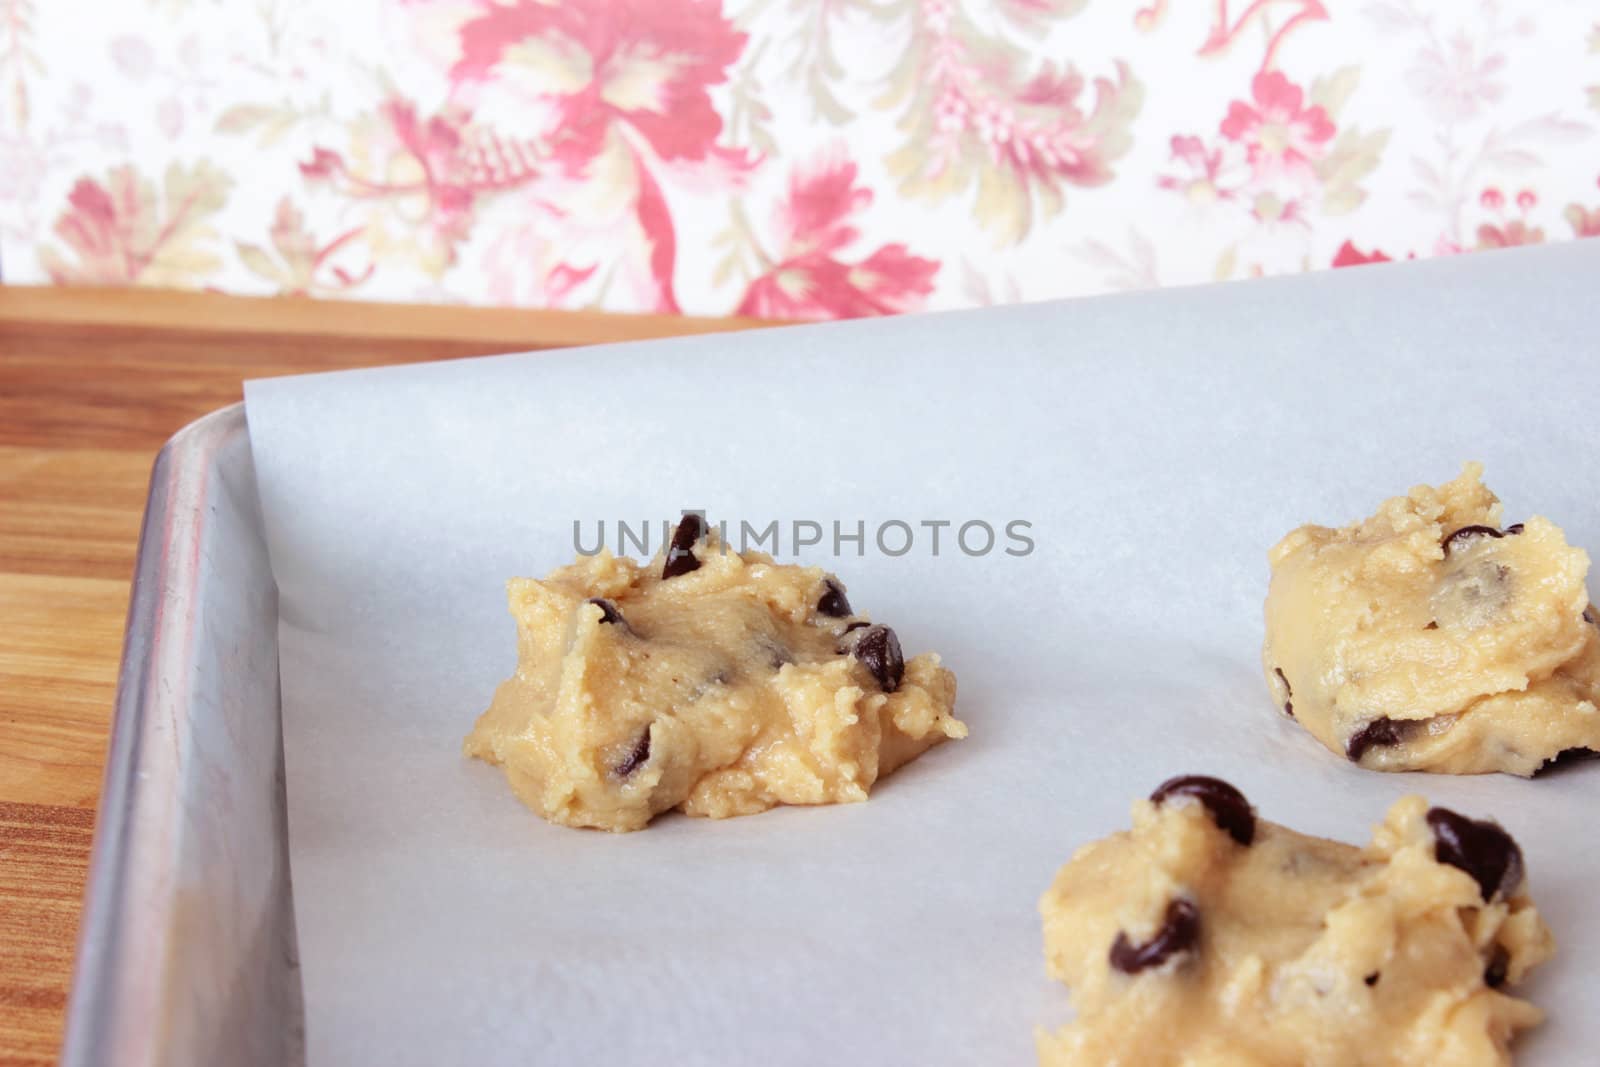 A close-up image of a cookie sheet lined with parchment paper, with chocolate chip cookie dough shaped into cookies, on a wooden counter with a red and white vintage flowered wallpaper background.